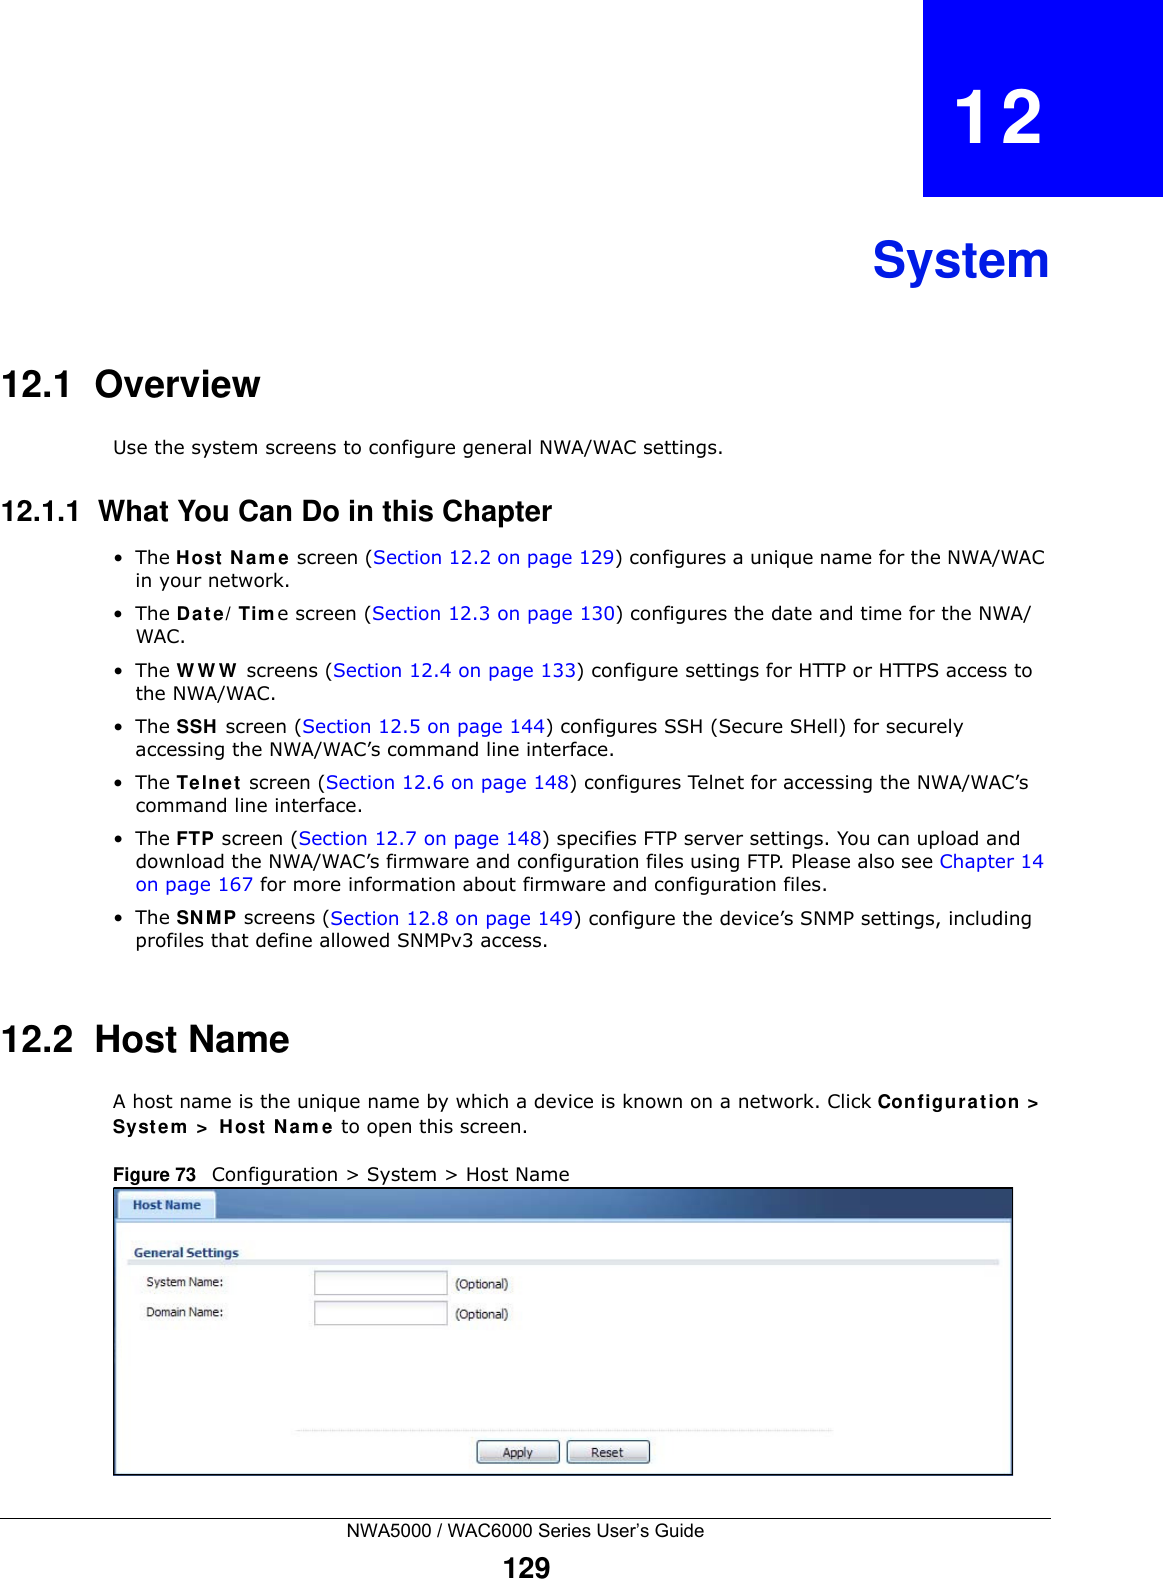 NWA5000 / WAC6000 Series User’s Guide129CHAPTER   12System12.1  OverviewUse the system screens to configure general NWA/WAC settings. 12.1.1  What You Can Do in this Chapter•The Host Name screen (Section 12.2 on page 129) configures a unique name for the NWA/WAC in your network.•The Date/Time screen (Section 12.3 on page 130) configures the date and time for the NWA/WAC.•The WWW screens (Section 12.4 on page 133) configure settings for HTTP or HTTPS access to the NWA/WAC. •The SSH screen (Section 12.5 on page 144) configures SSH (Secure SHell) for securely accessing the NWA/WAC’s command line interface. •The Telnet screen (Section 12.6 on page 148) configures Telnet for accessing the NWA/WAC’s command line interface. •The FTP screen (Section 12.7 on page 148) specifies FTP server settings. You can upload and download the NWA/WAC’s firmware and configuration files using FTP. Please also see Chapter 14 on page 167 for more information about firmware and configuration files.•The SNMP screens (Section 12.8 on page 149) configure the device’s SNMP settings, including profiles that define allowed SNMPv3 access.12.2  Host NameA host name is the unique name by which a device is known on a network. Click Configuration &gt; System &gt; Host Name to open this screen.Figure 73   Configuration &gt; System &gt; Host Name